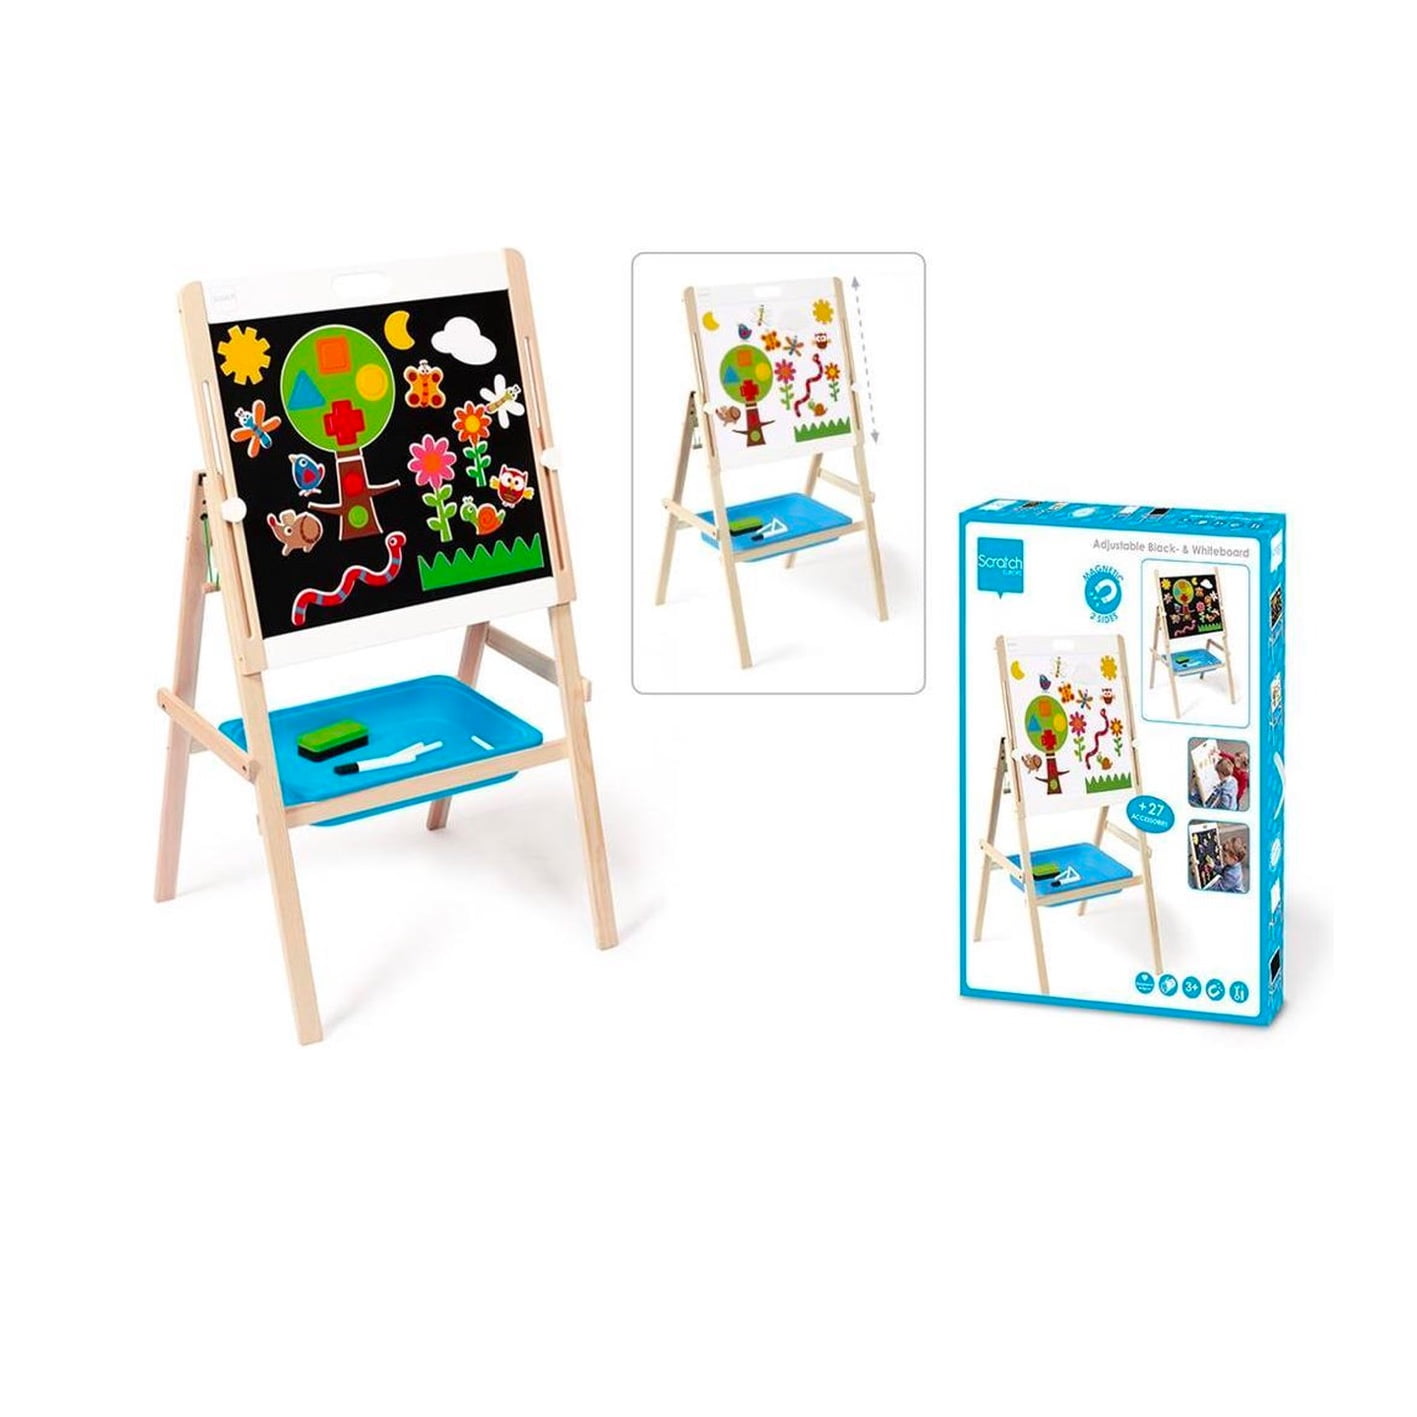 Scratch Double-sided board with accessories